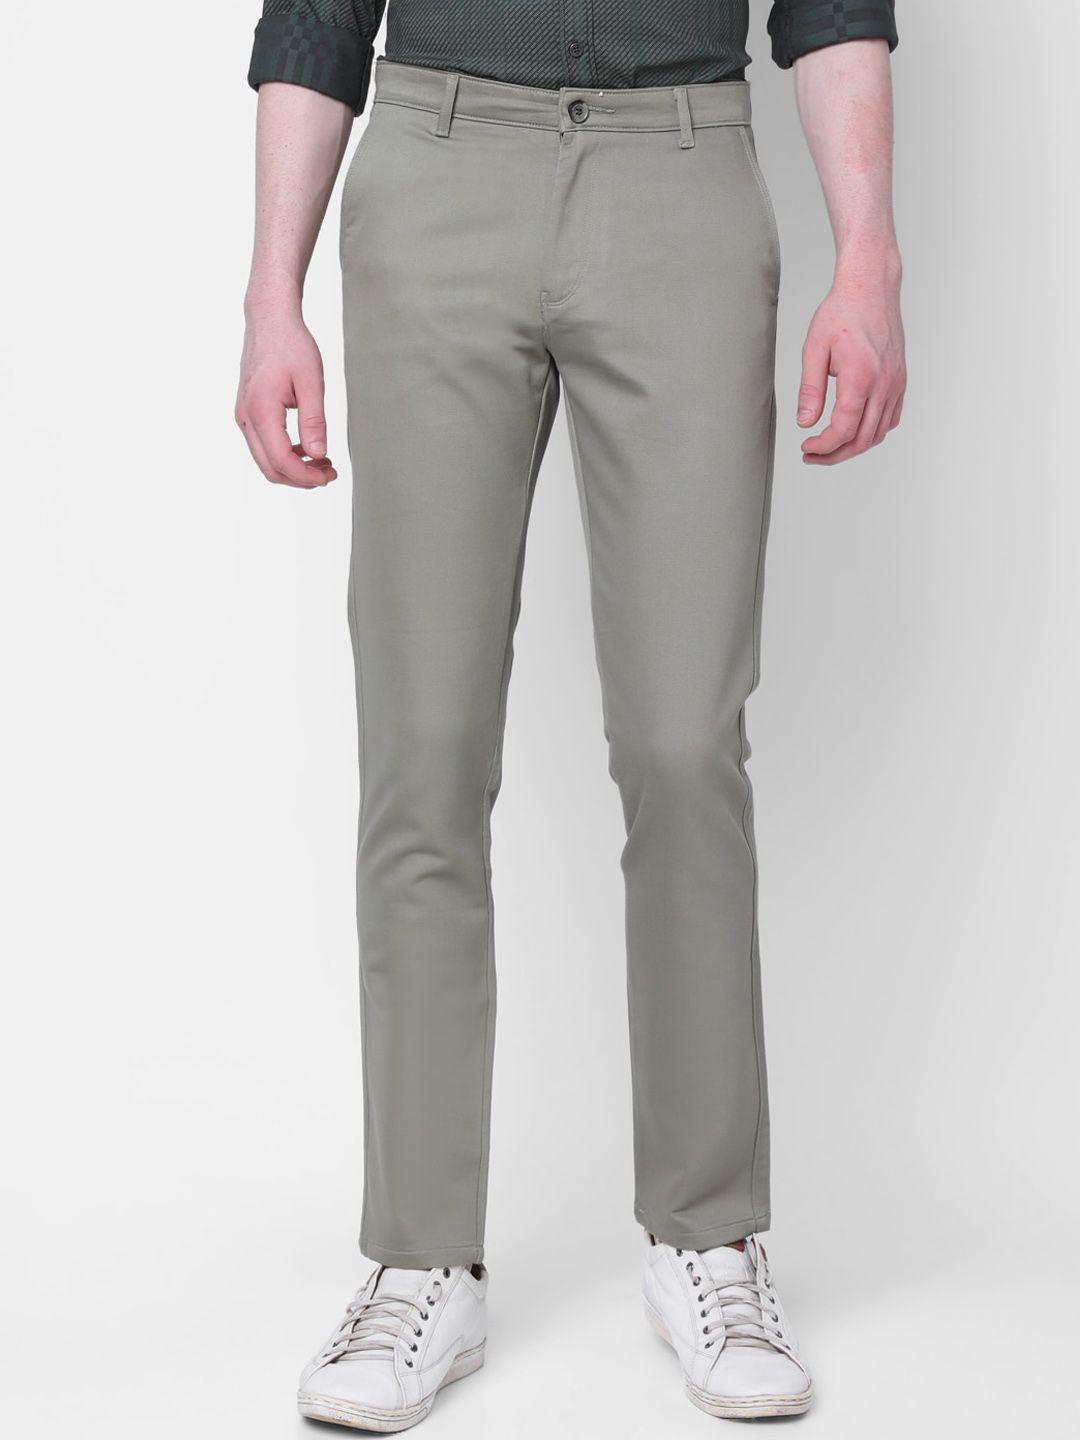 mozzo-men-olive-green-slim-fit-trousers